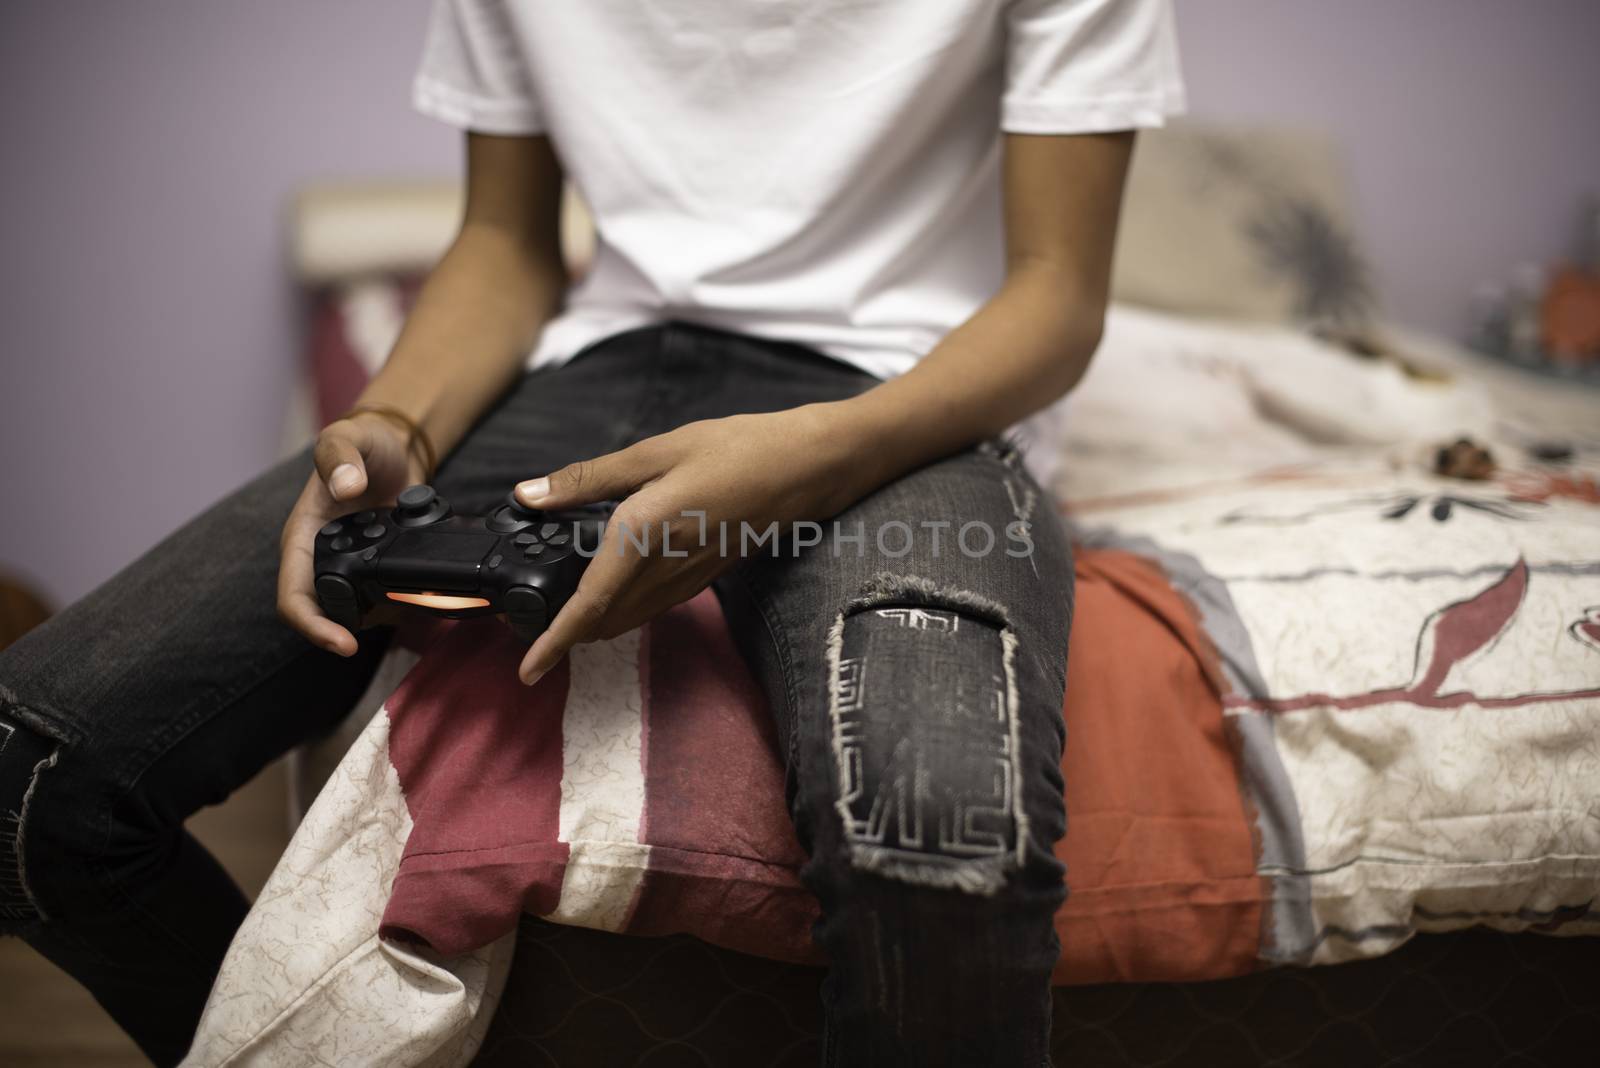 Teenager playing video games at home